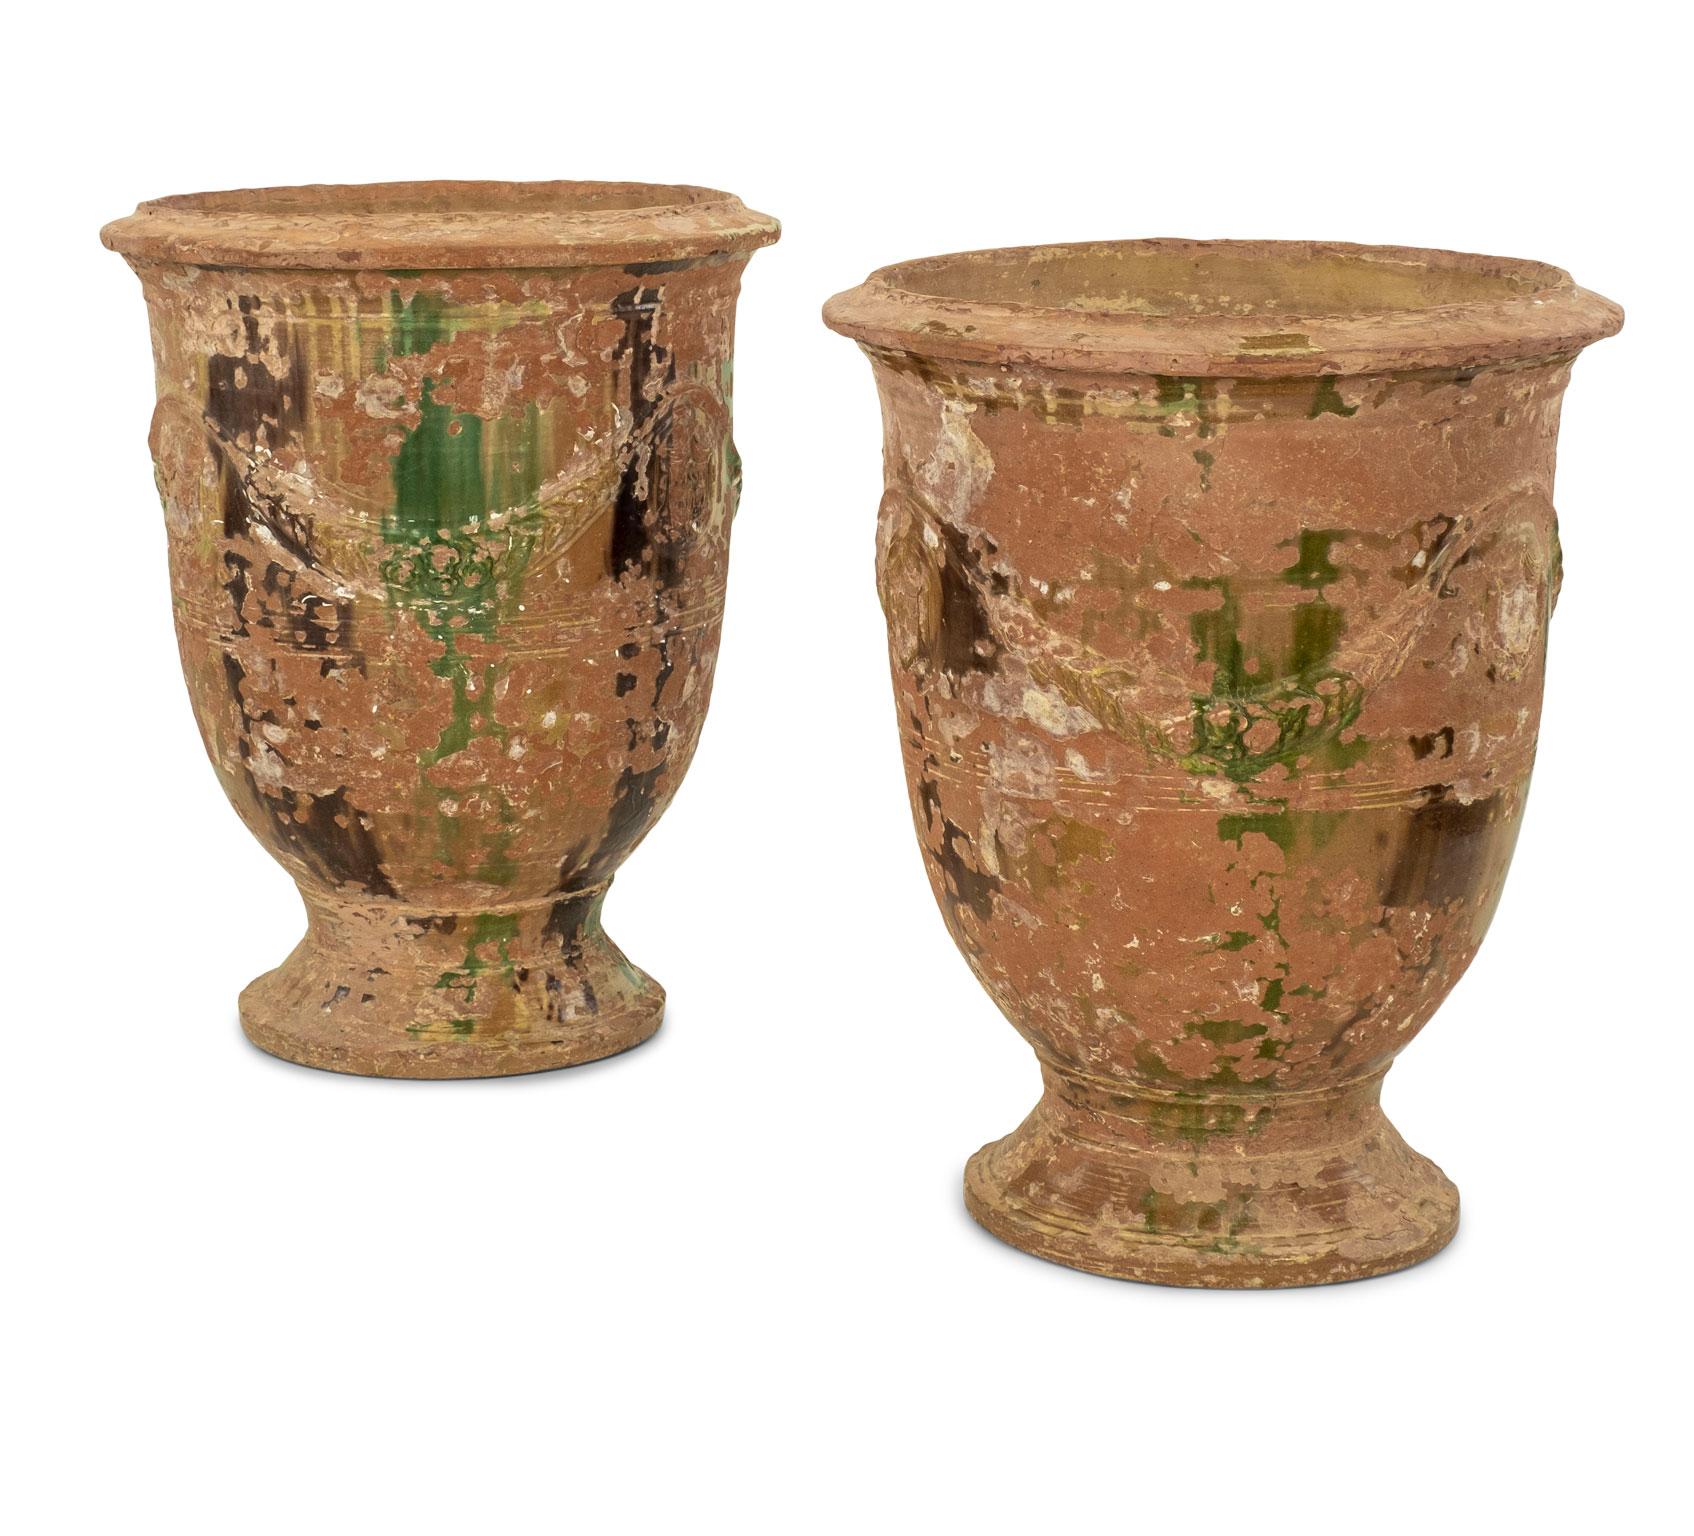 Pair of large mid-19th century Anduze jars. Decorated in dark brown and green drip glaze and adorned with swag decoration in raised relief. The Boisset mark featured in cartouches. Some minor chipping at bases and rims consistent with age and use.